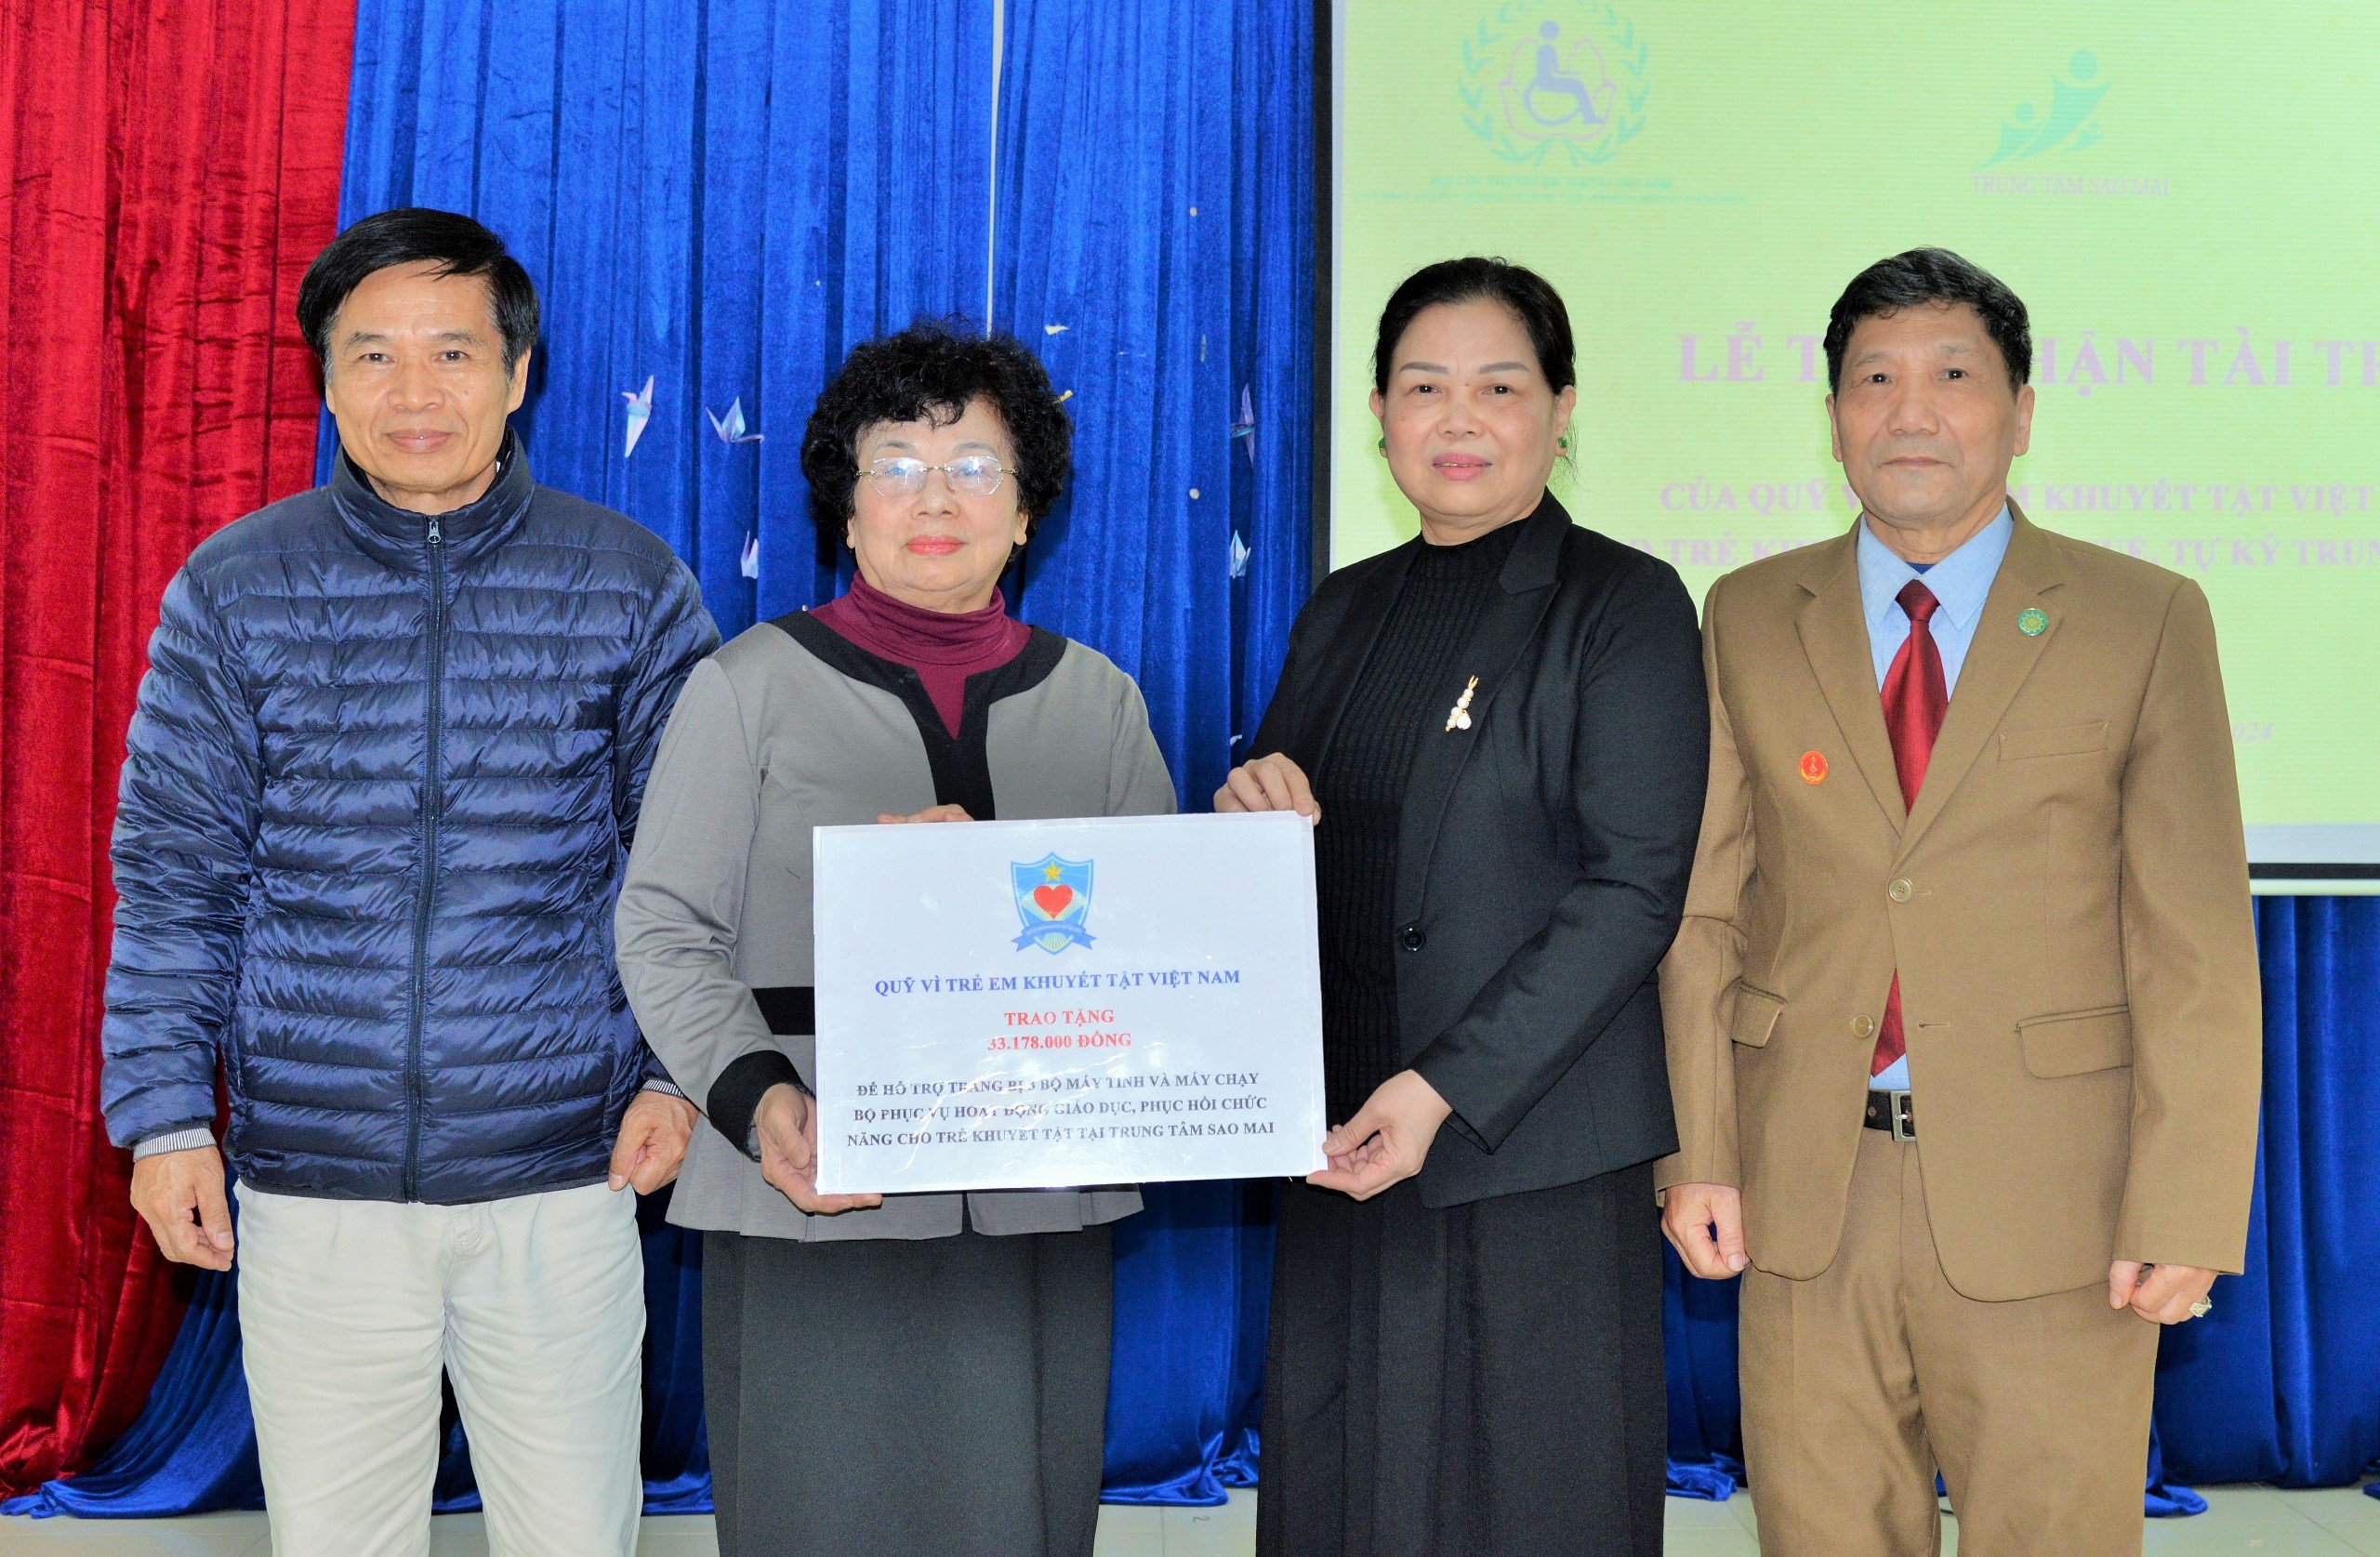 Vietnam Foundation for Children with Disabilities donated new equipment to Morning Star Center